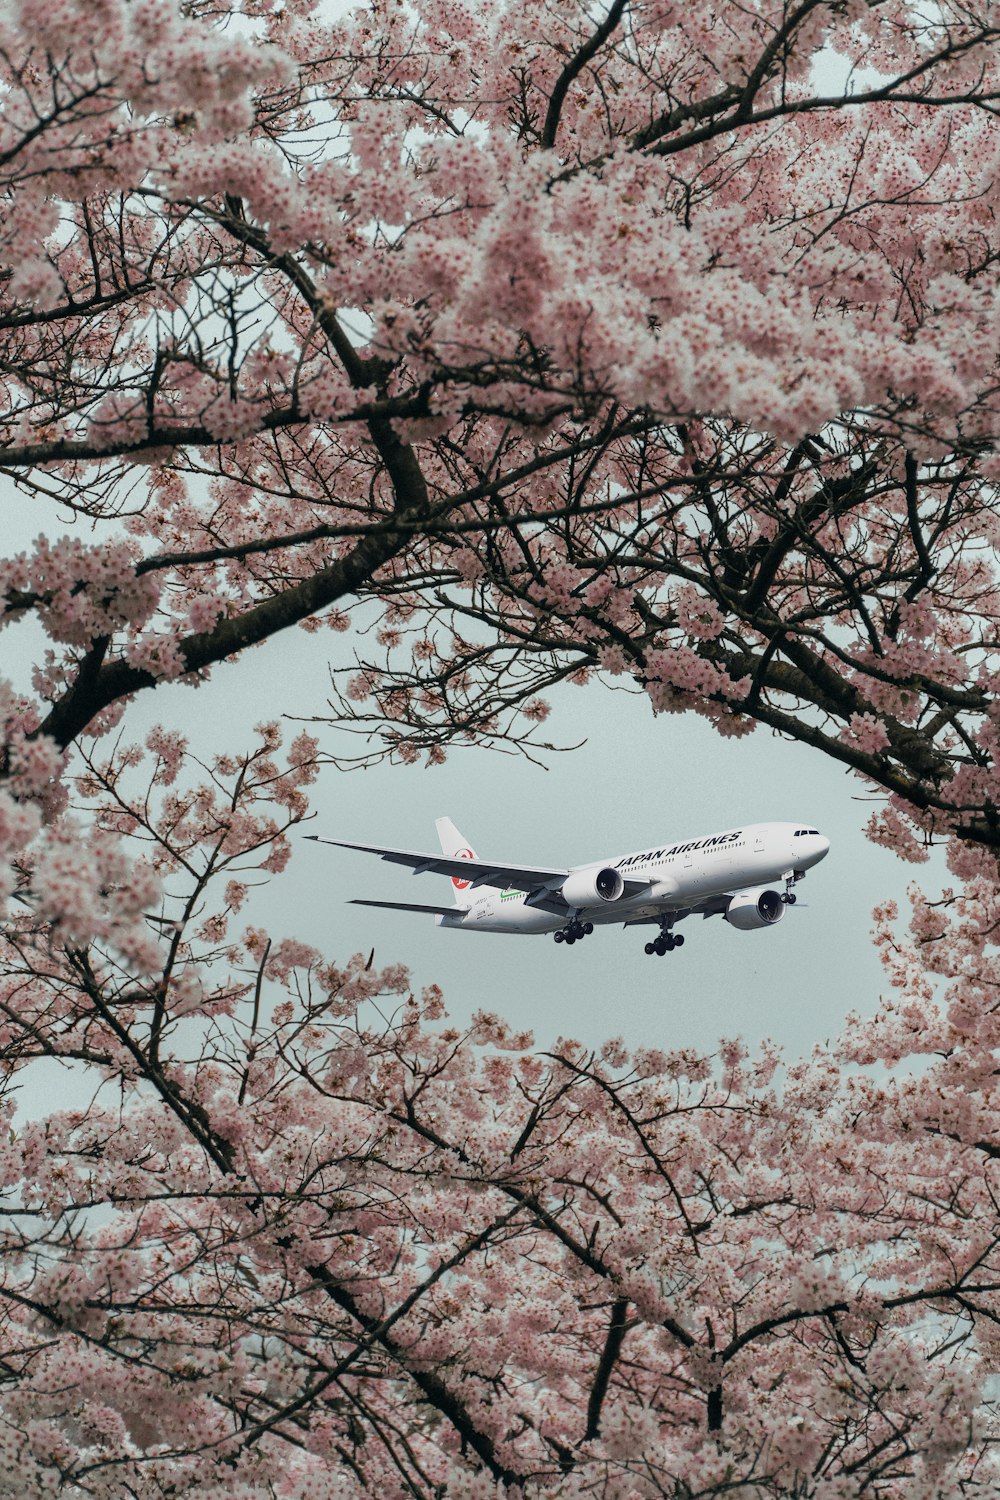 a large jetliner flying over a tree filled with pink flowers